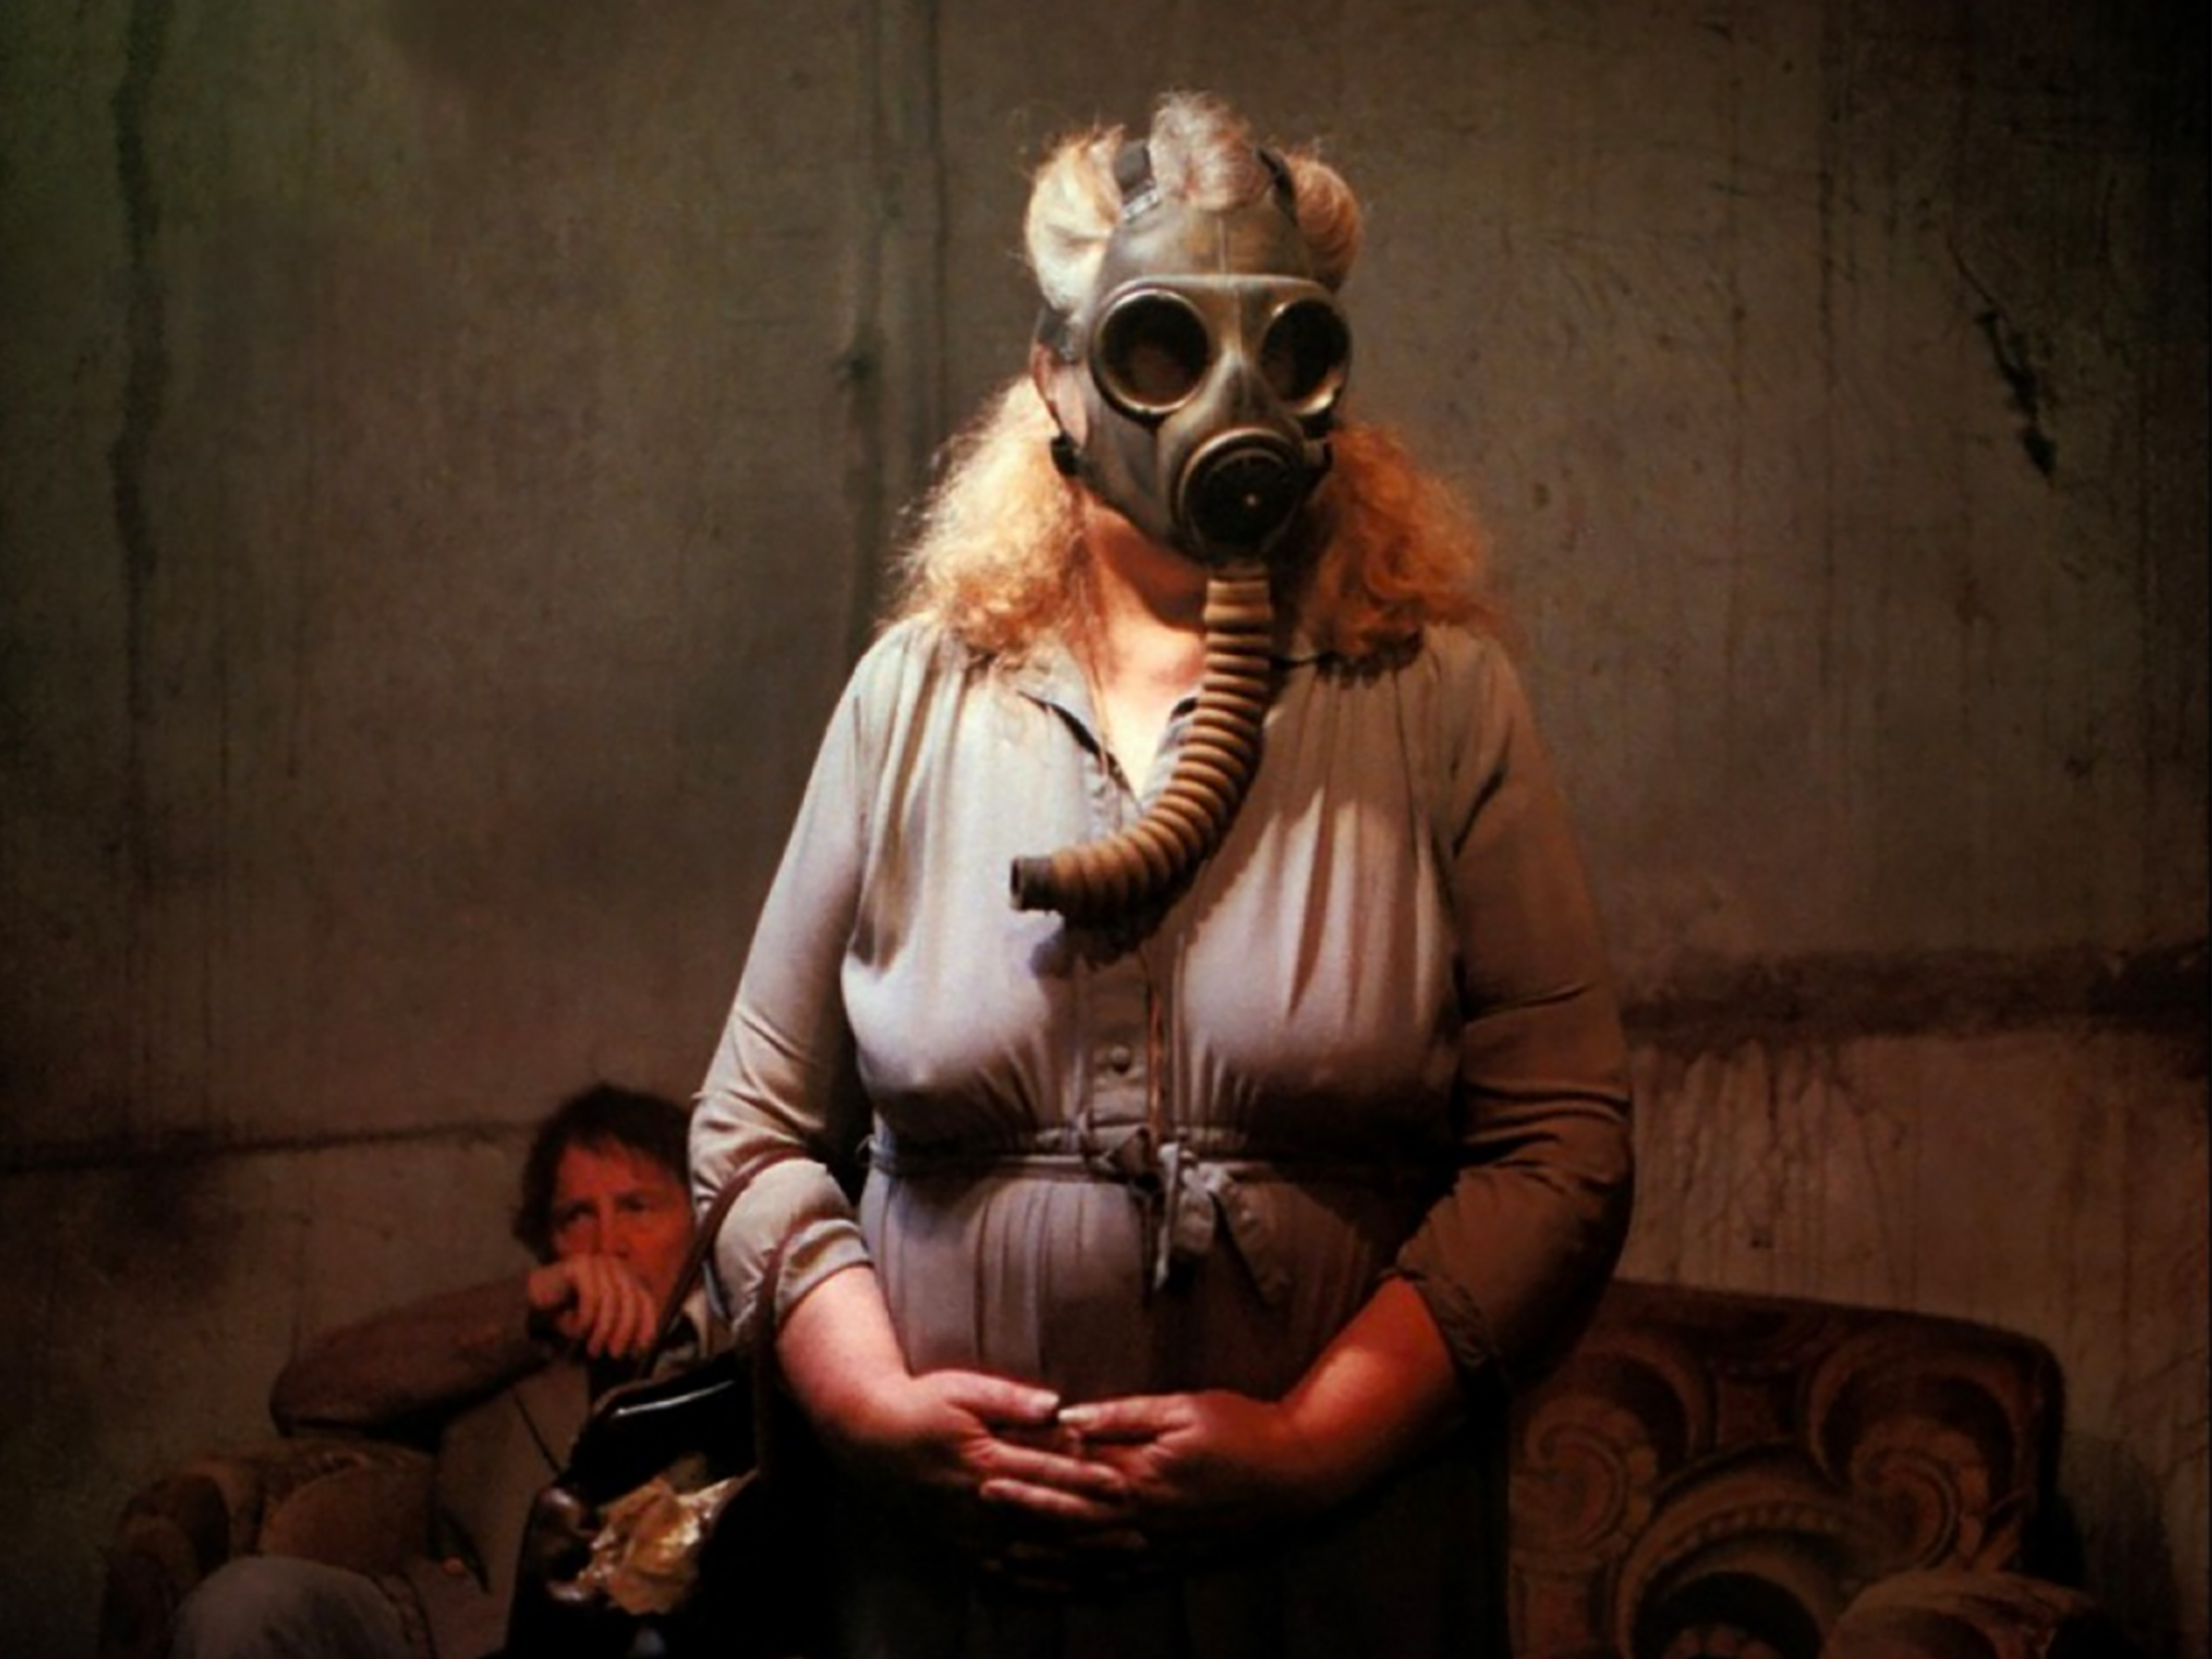 Two characters in a tense scene, one standing with a gas mask and one seated in the background